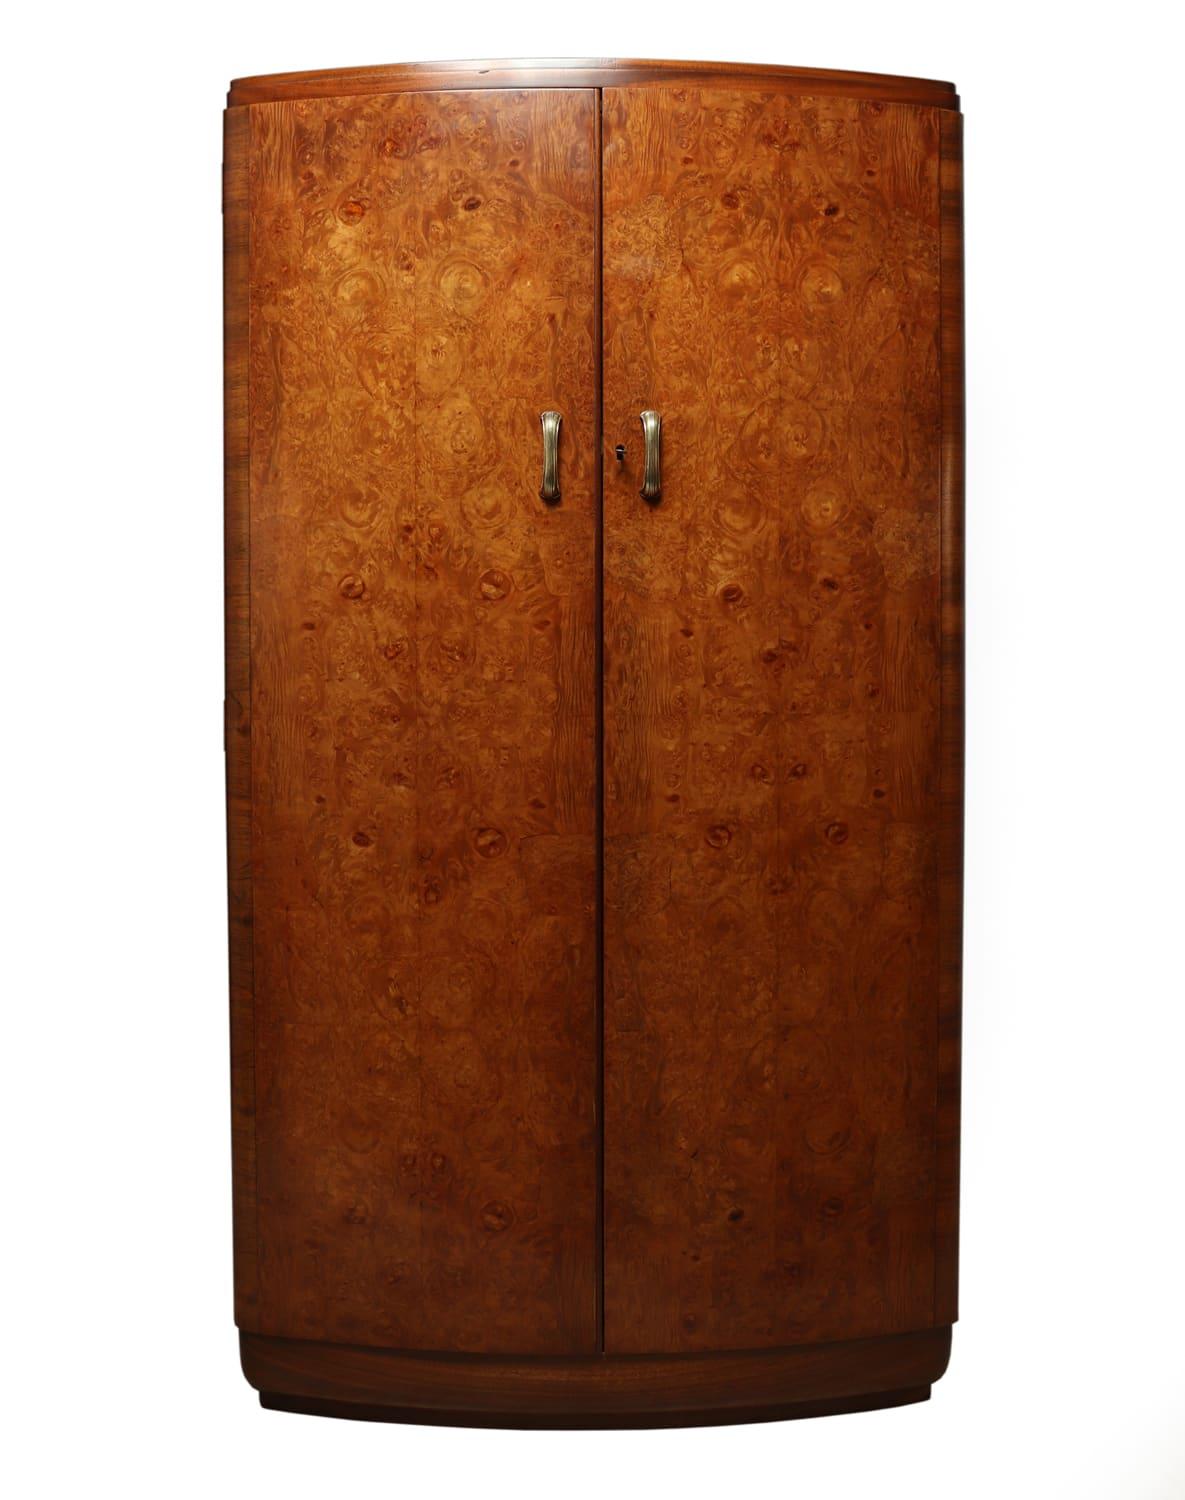 Art Deco walnut bow front gentleman wardrobe circa 1930
A fine quality English bow fronted burr walnut fitted gentleman's wardrobe having brass handles, the fitted interior has two drawers and a slide out trouser rail, the wardrobe has been fully